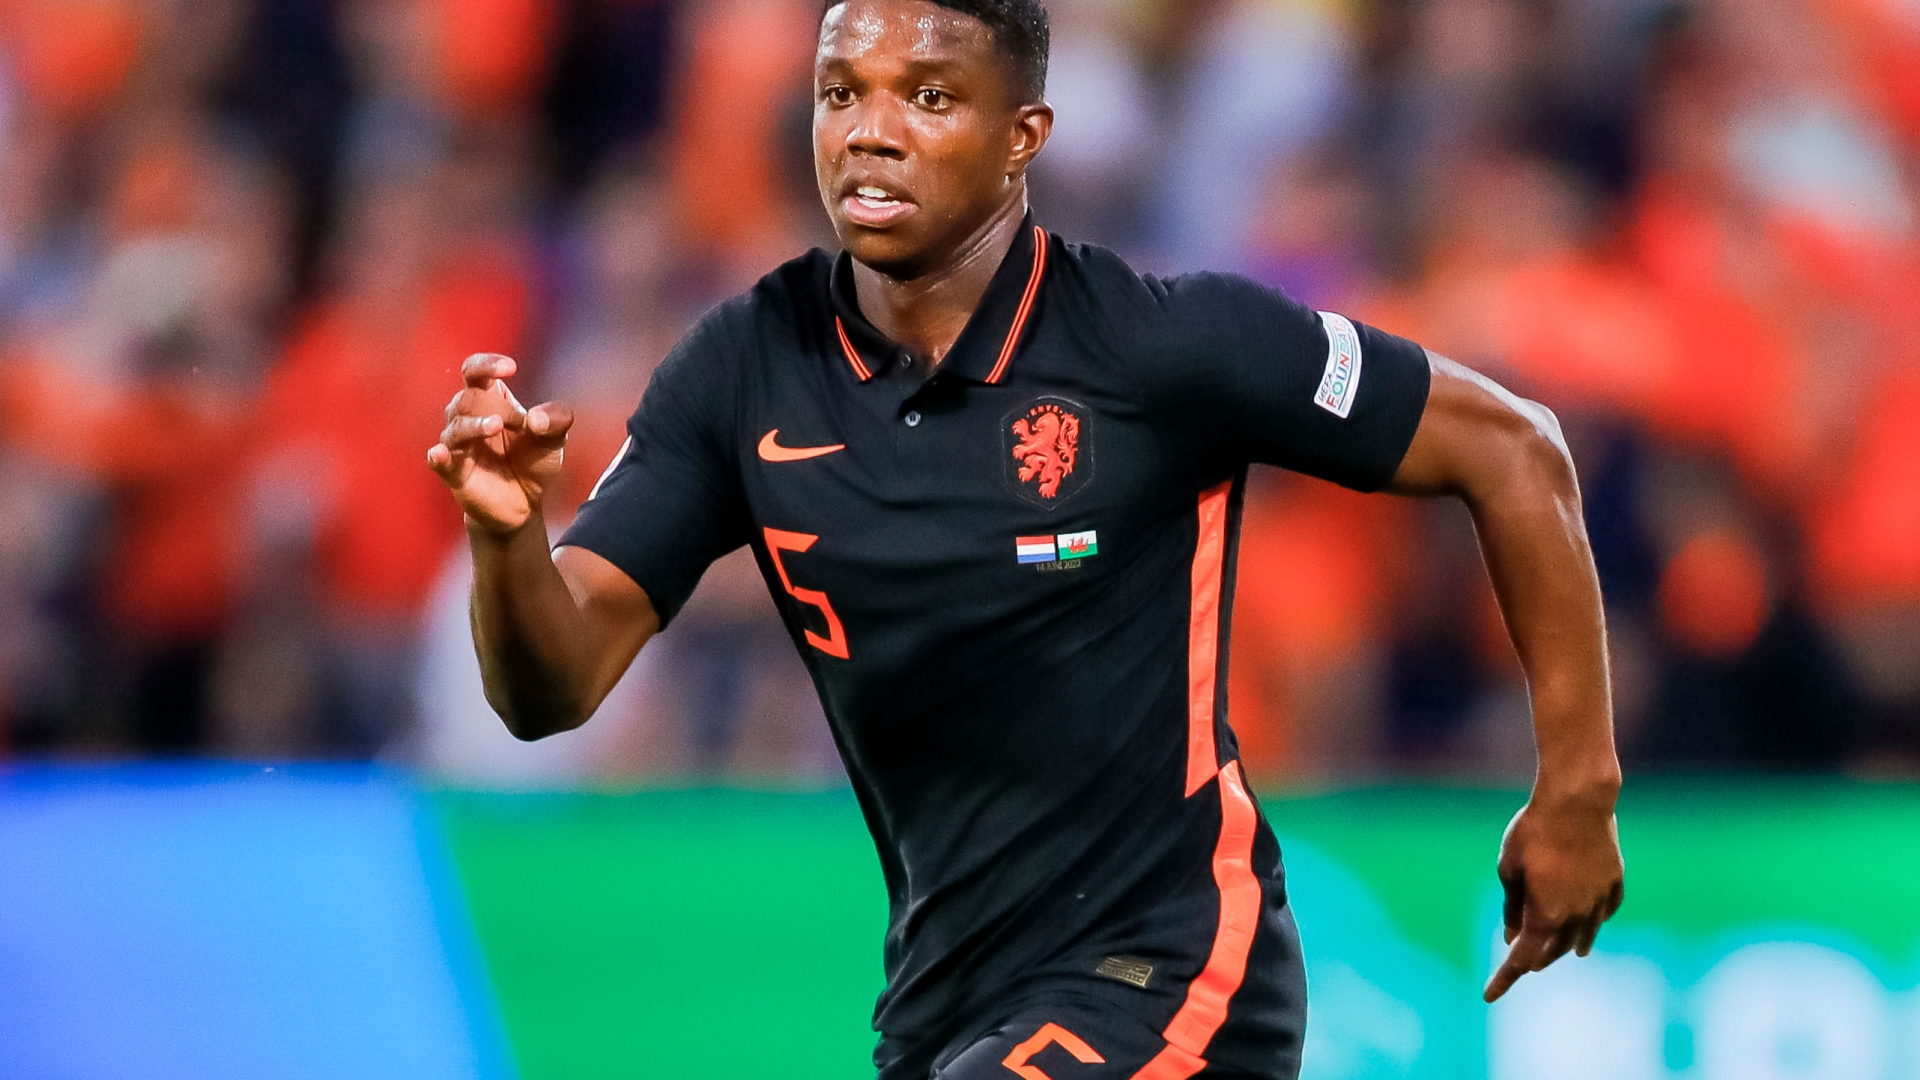 Tyrell Malacia dreamed of returning to Old Trafford one day after playing there for Feyenoord youth and spoke to Robin van Persie about Manchester United as transfer edges closer